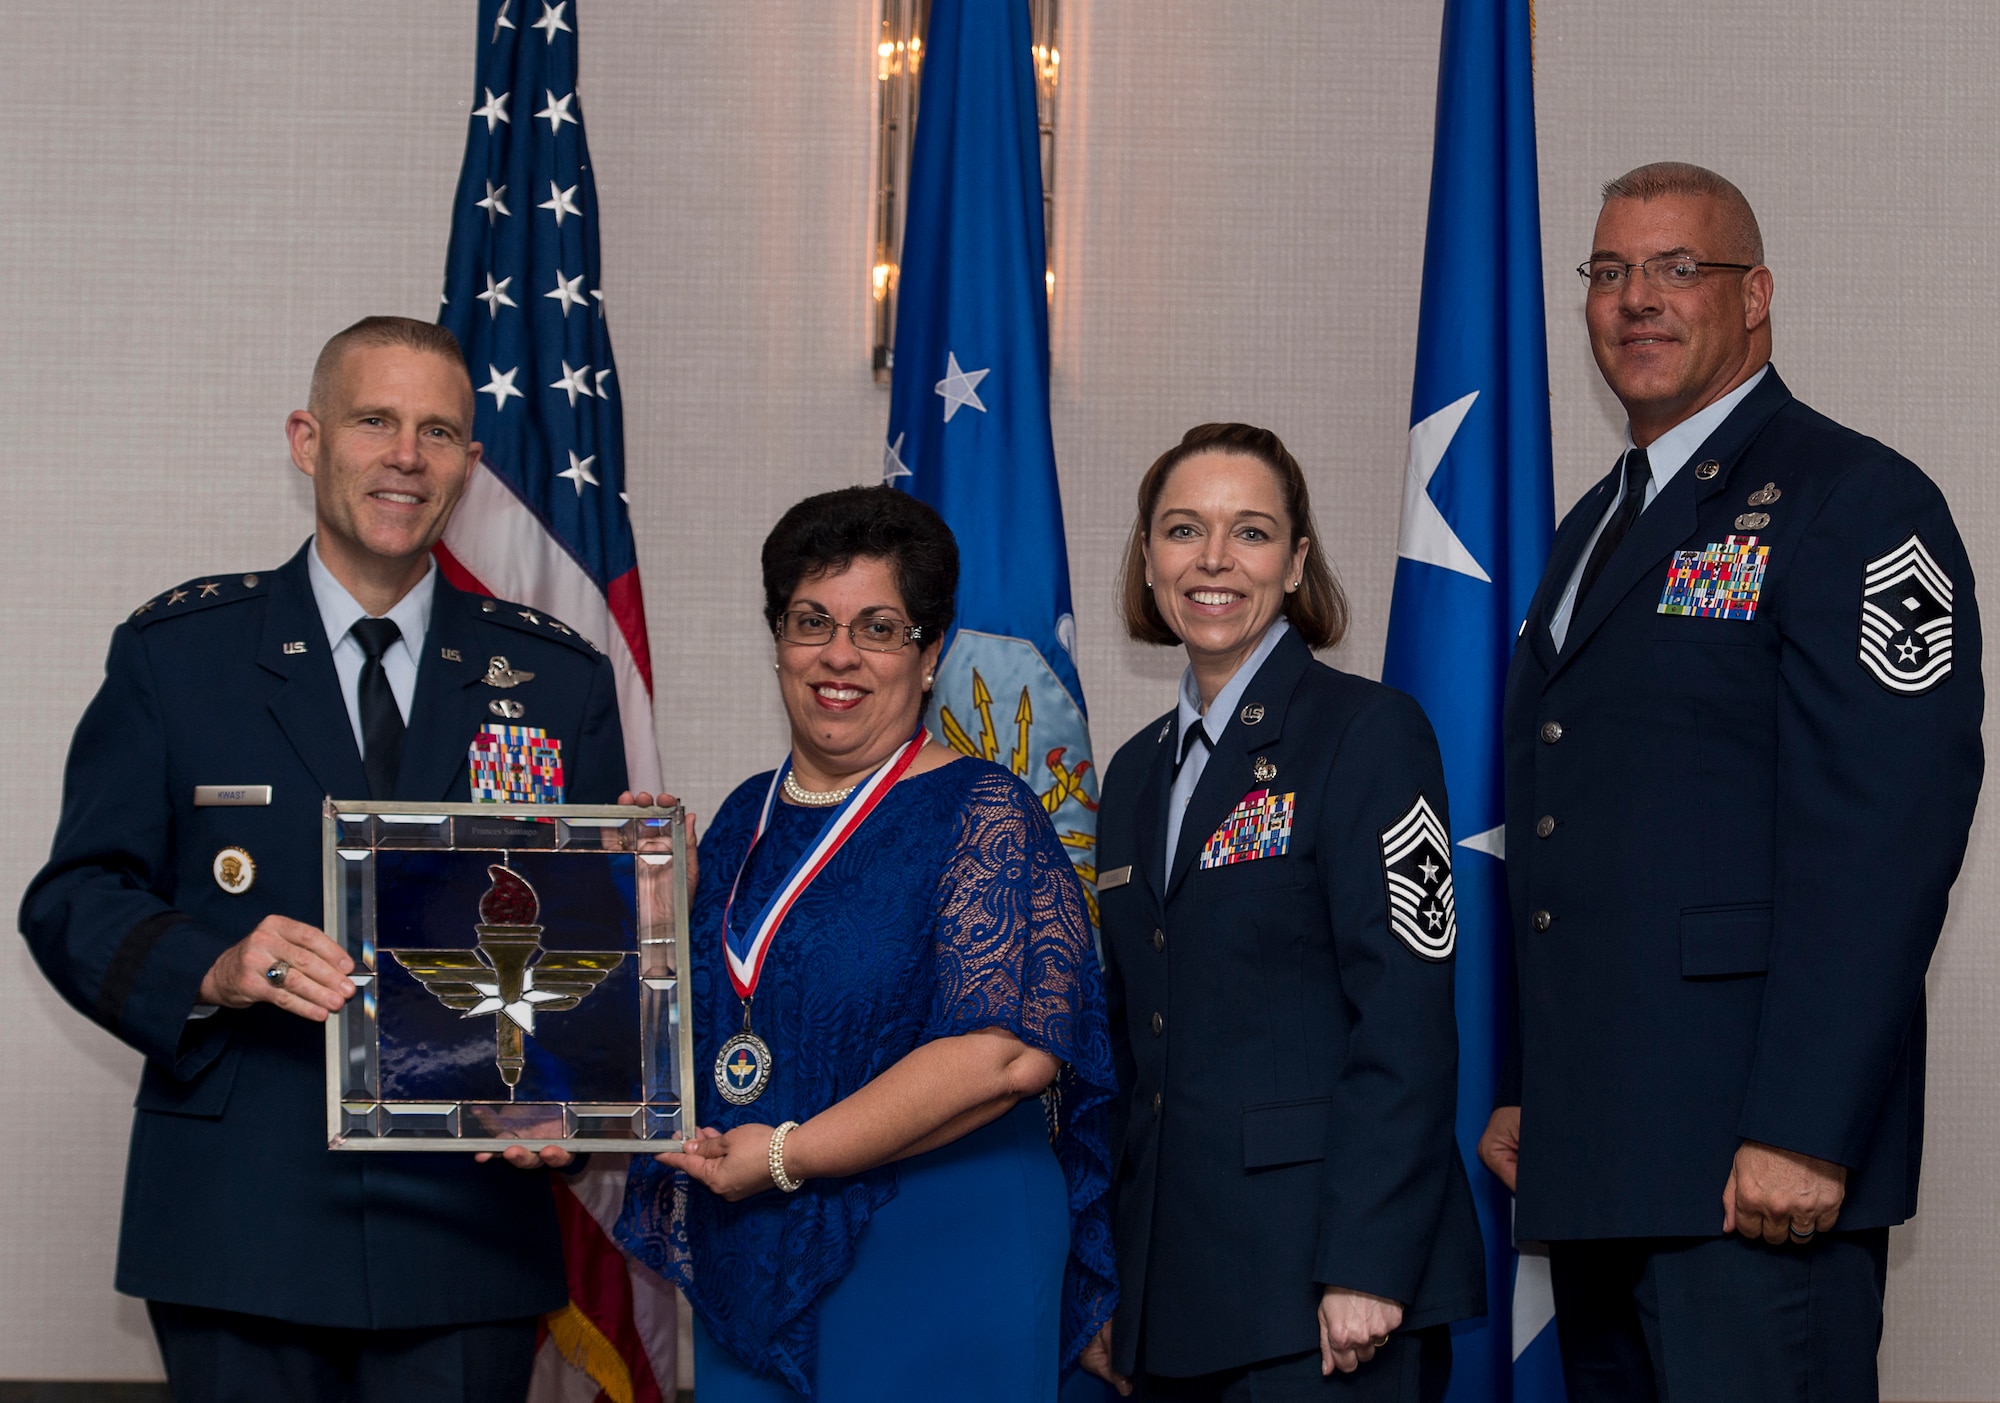 Frances Santiago, Identification Card Section Lead assigned to the 802nd Force Support Squadron at Joint Base San Antonio-Lackland, Texas, receives the 2017 Non-supervisory Civilian of the Year Award from Lt. Gen. Steve Kwast, Commander of AETC, during the AETC 12 Outstanding Airmen of the Year Awards banquet Feb. 22, 2018 in Orlando, Fla. Santiago won the prestigious Depart of Defense, Defense Manpower Data Center High Flyer award, restructured two site operations reducing customer wait times by 50 percent and earning a top 10 rank for office Air Force wide, as well as vetted, educated and terminated 811 Common Access and Identification Cards saving Air Force $8.7 million in erroneous Tricare benefits. (U.S. Air Force photo by Staff Sgt. Kenneth W. Norman)